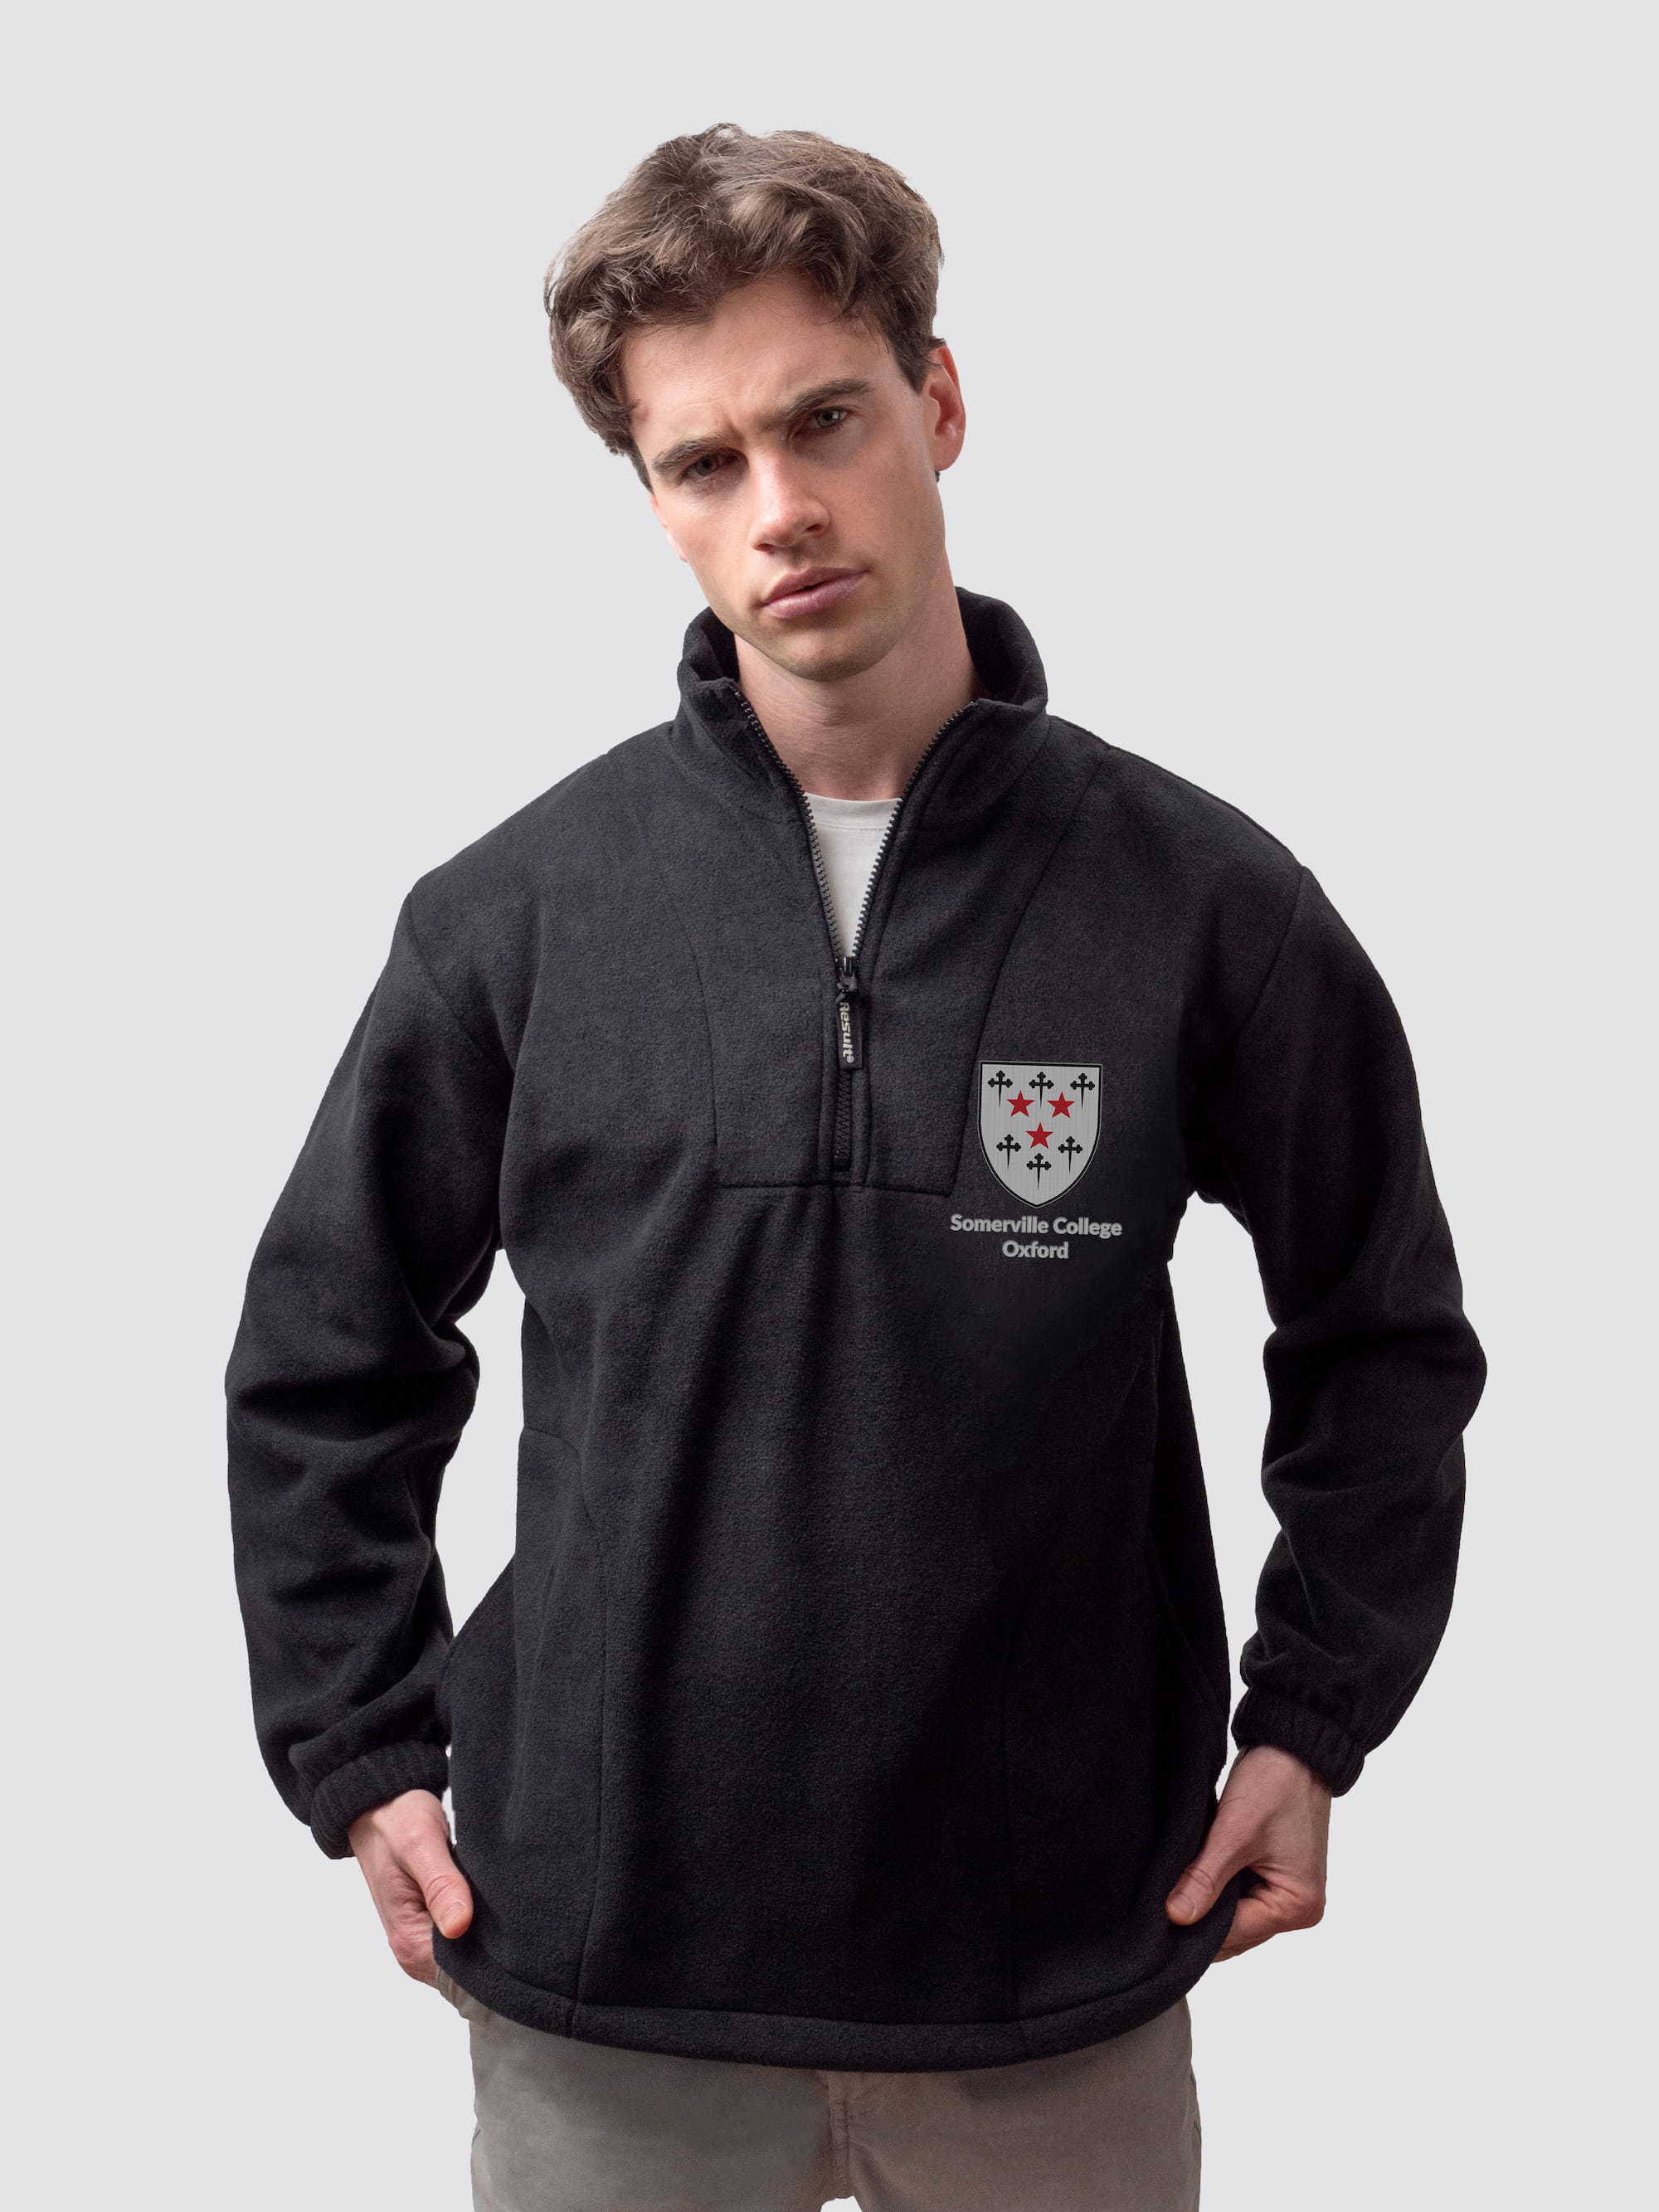 Oxford university fleece, with custom embroidered initials and Somerville crest